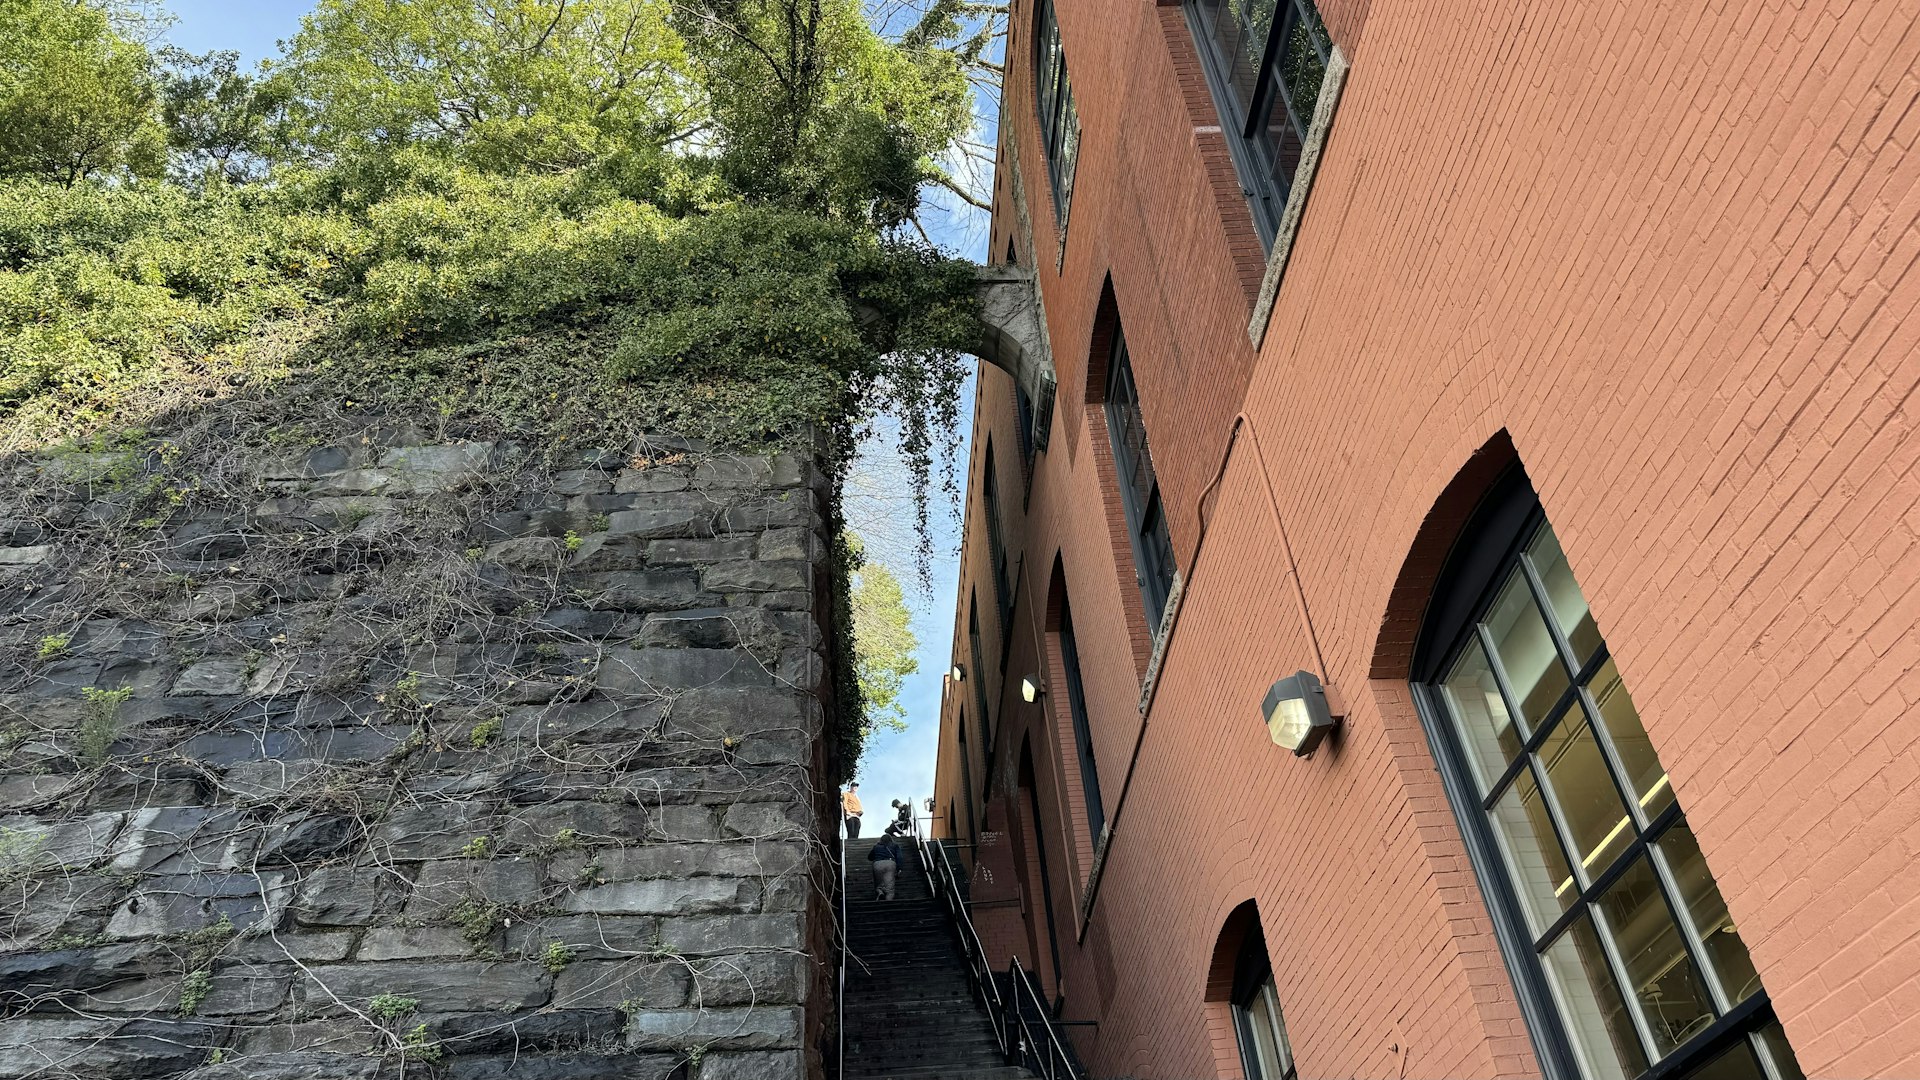 A narrow set of steps in Georgetown, DC – featured in "The Exorcist" 